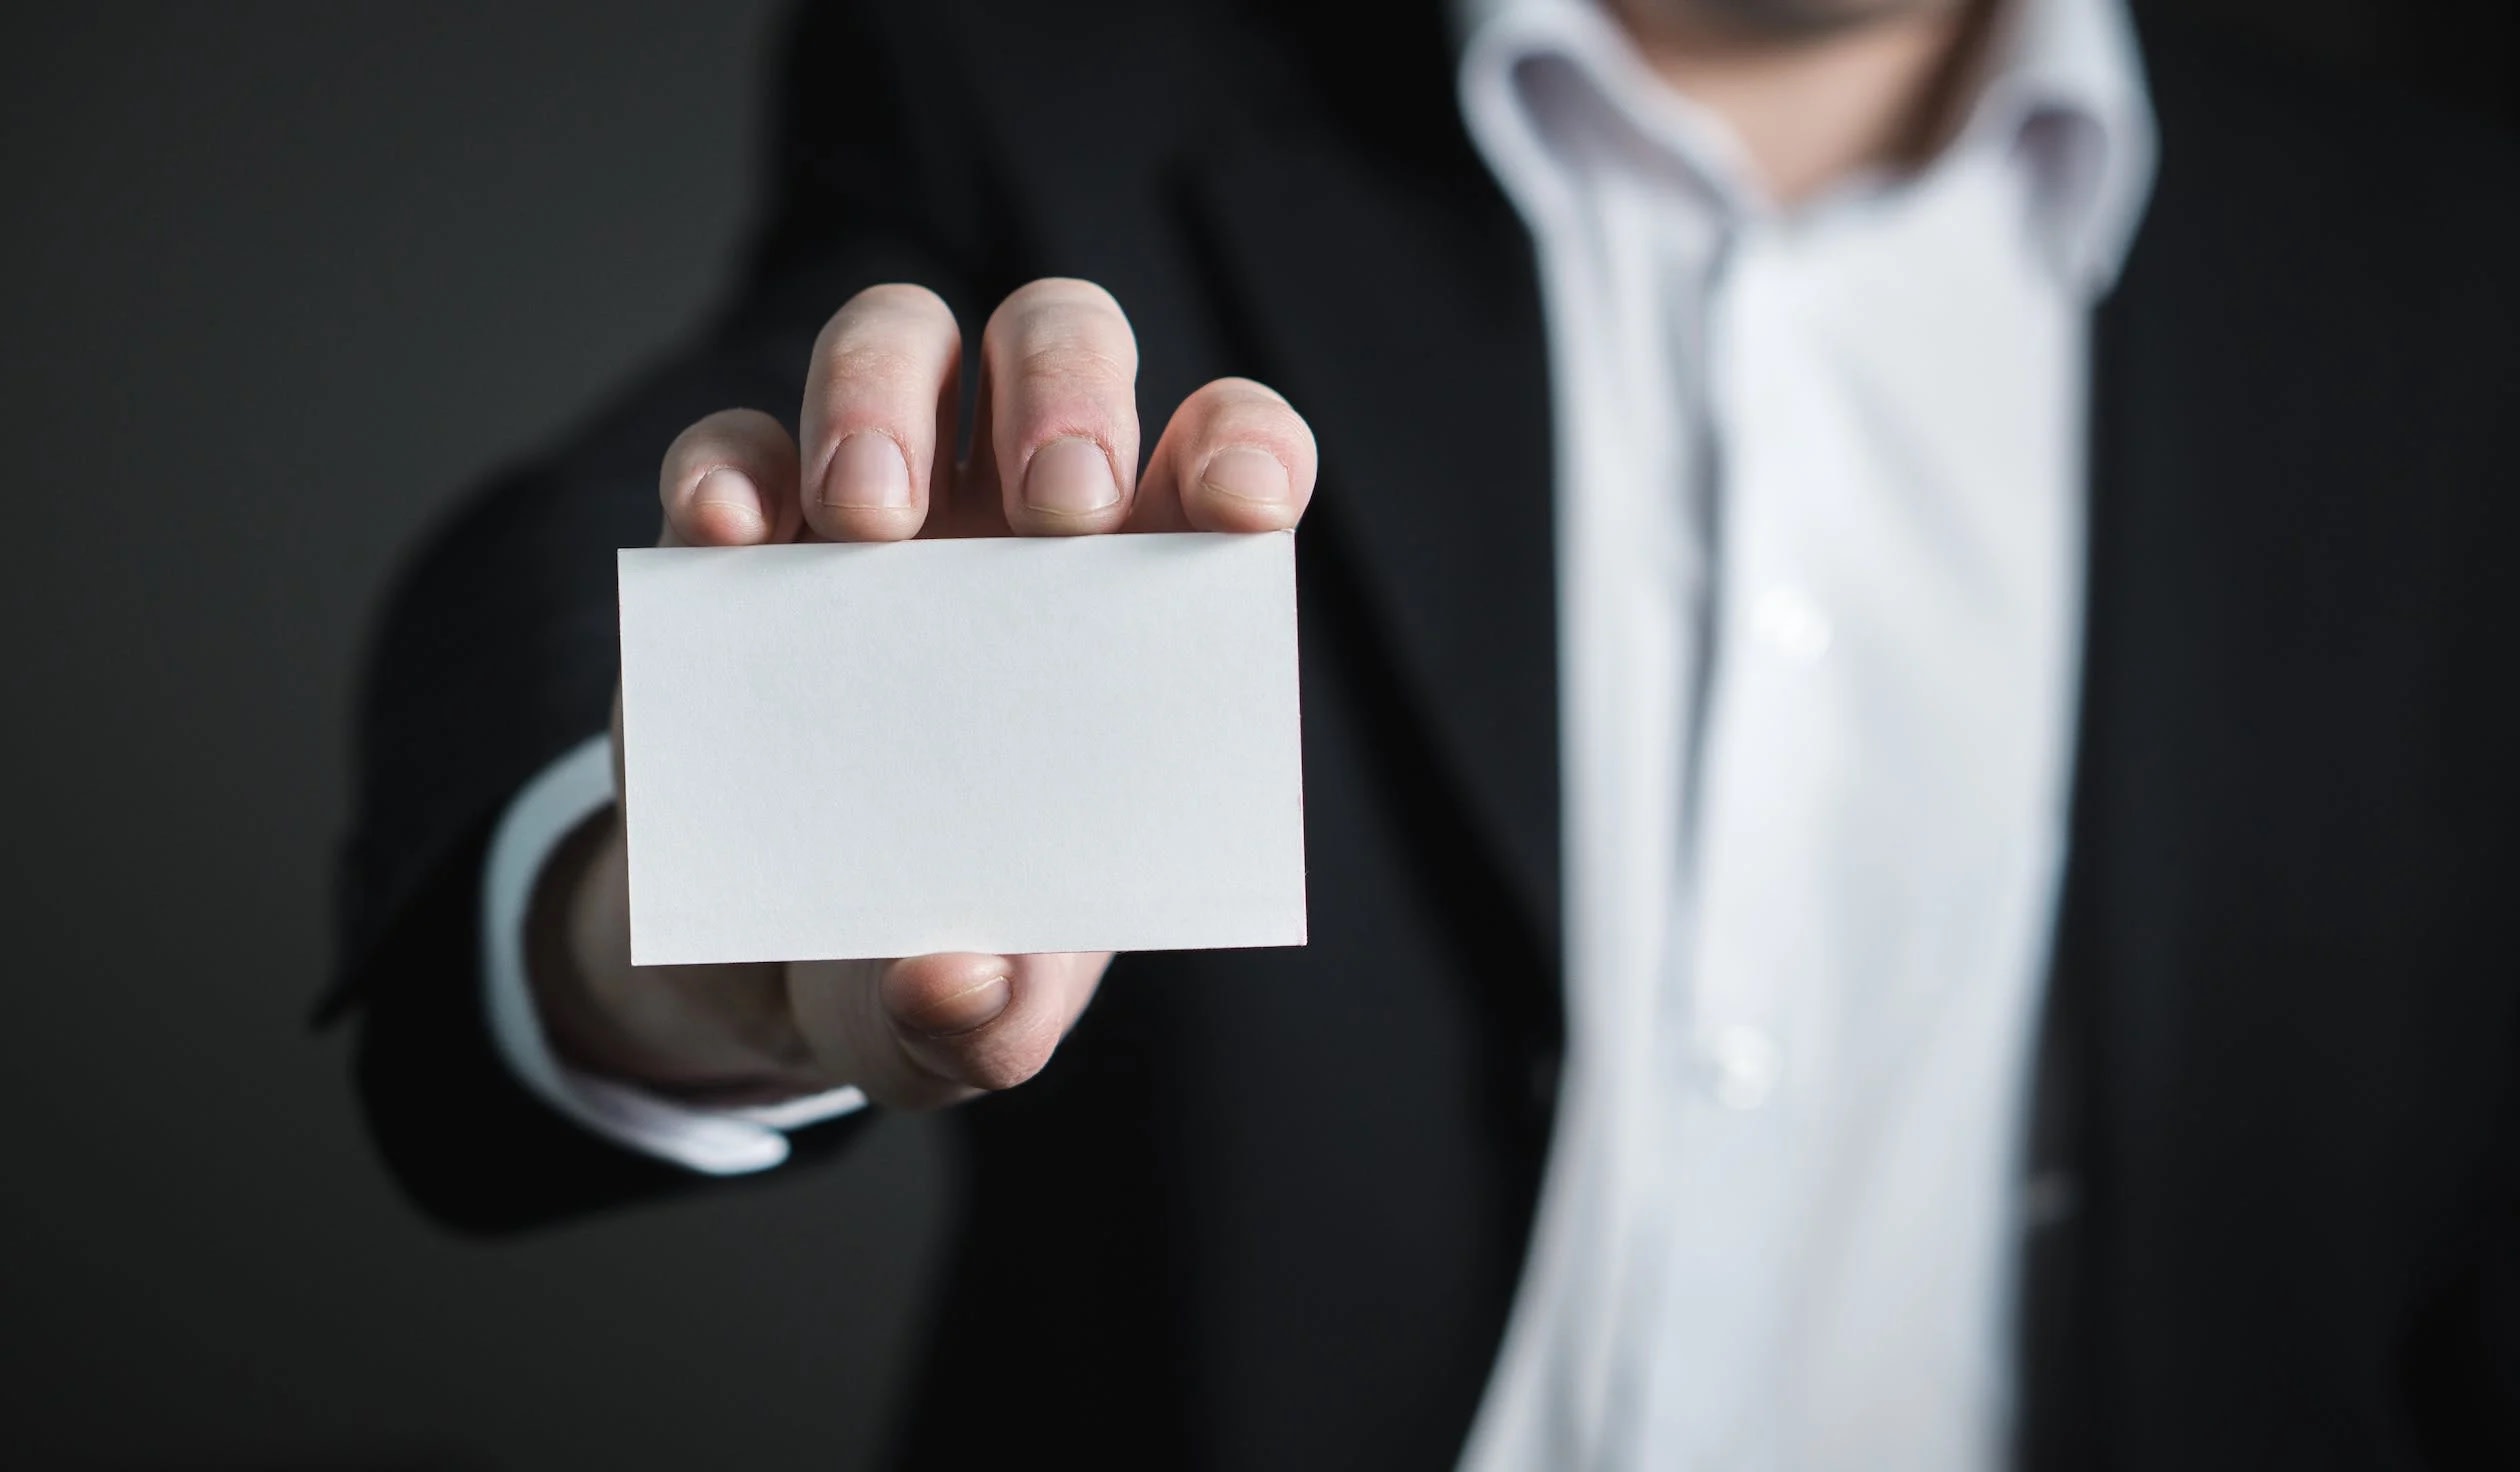 Image of blank paper card held by Caucasian man in business suit